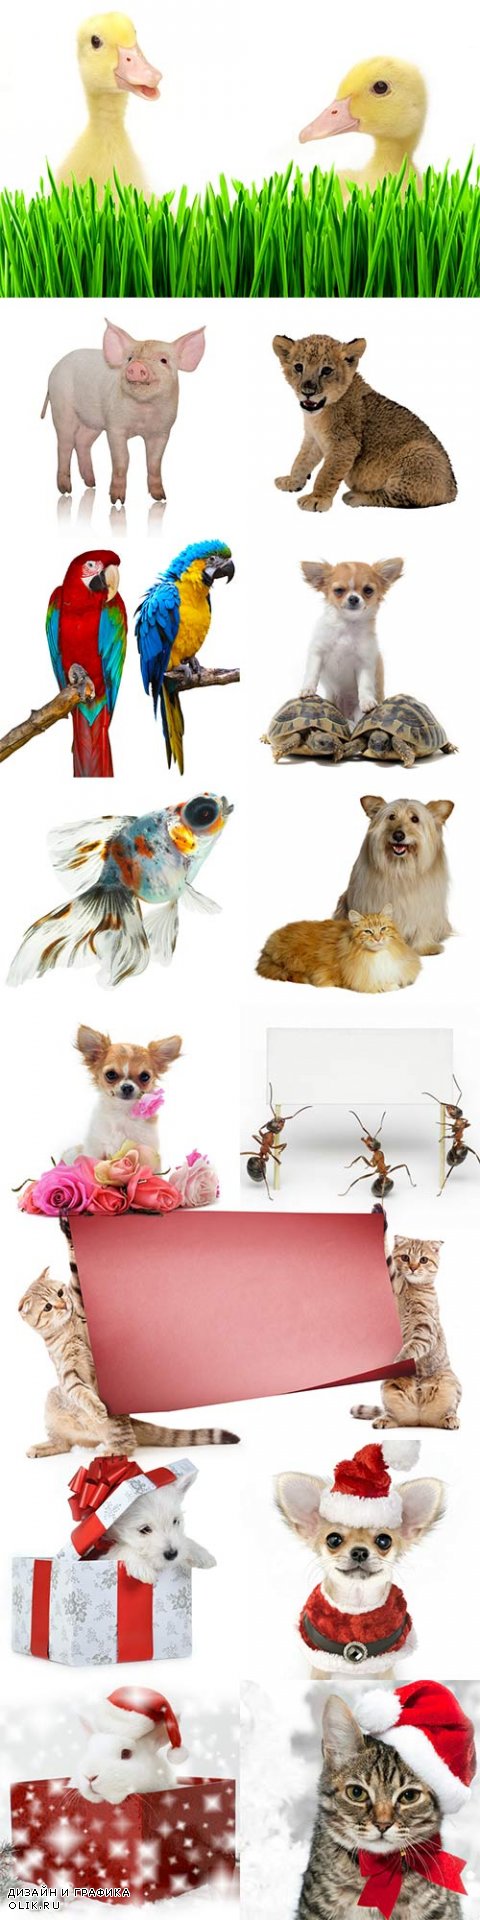 Animals on a white background